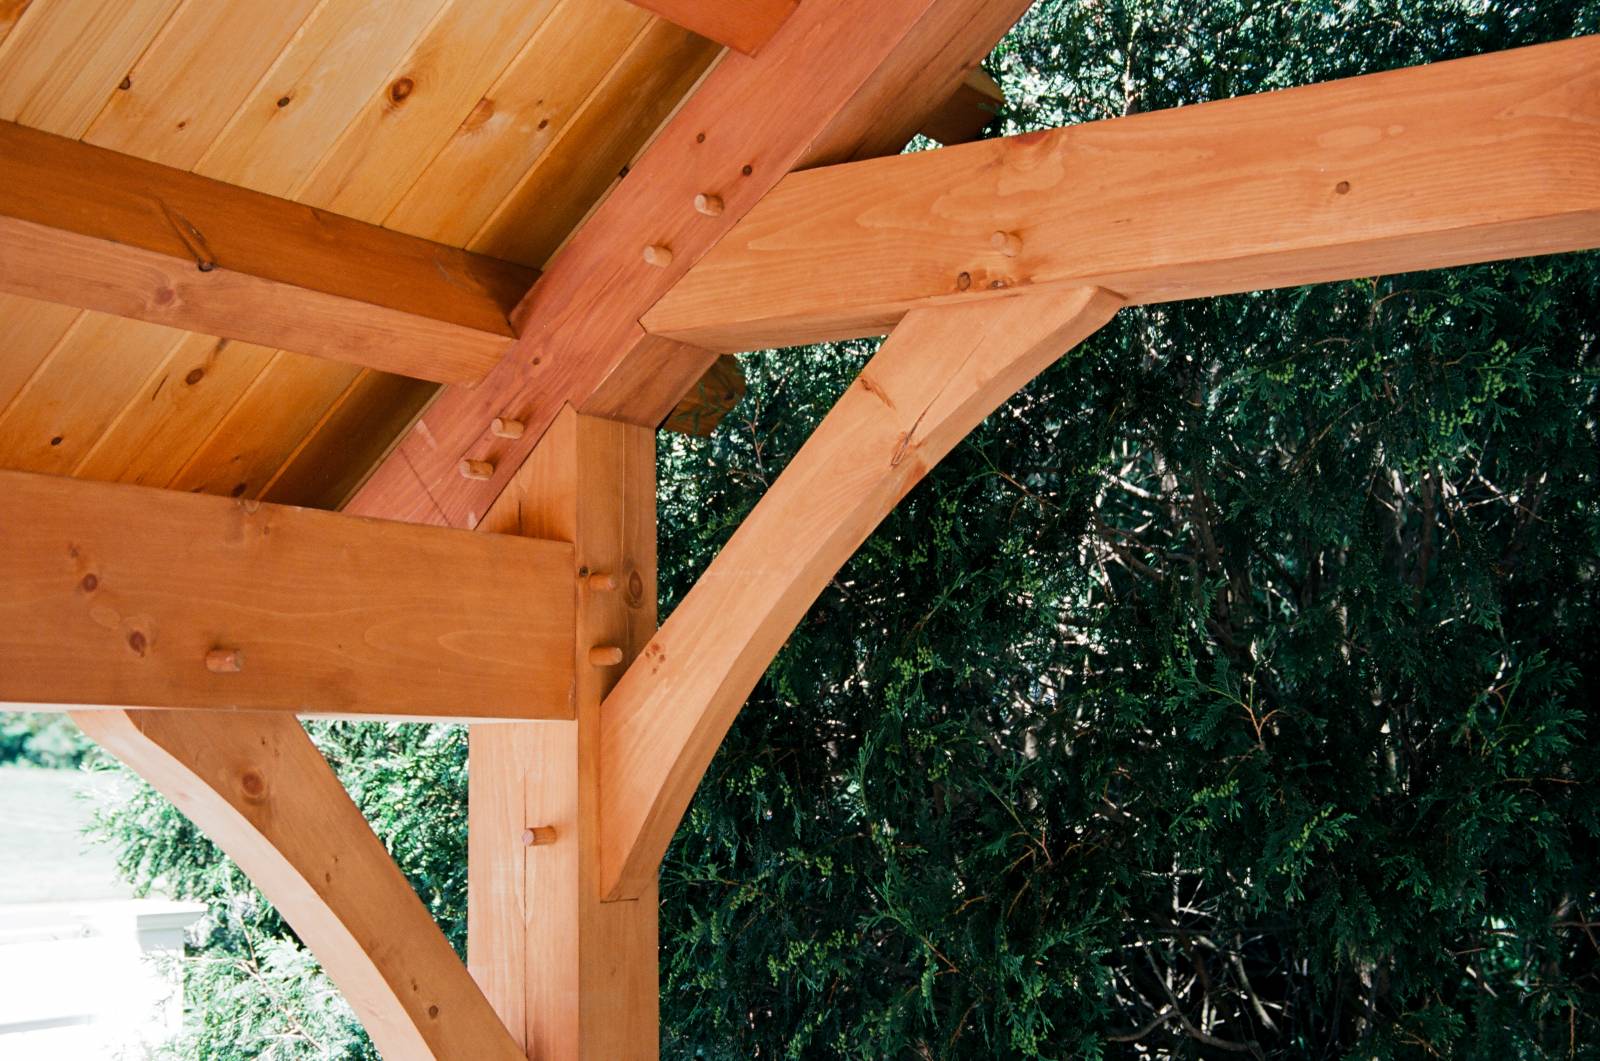 Timber frame joinery closeup: arched kneebrace